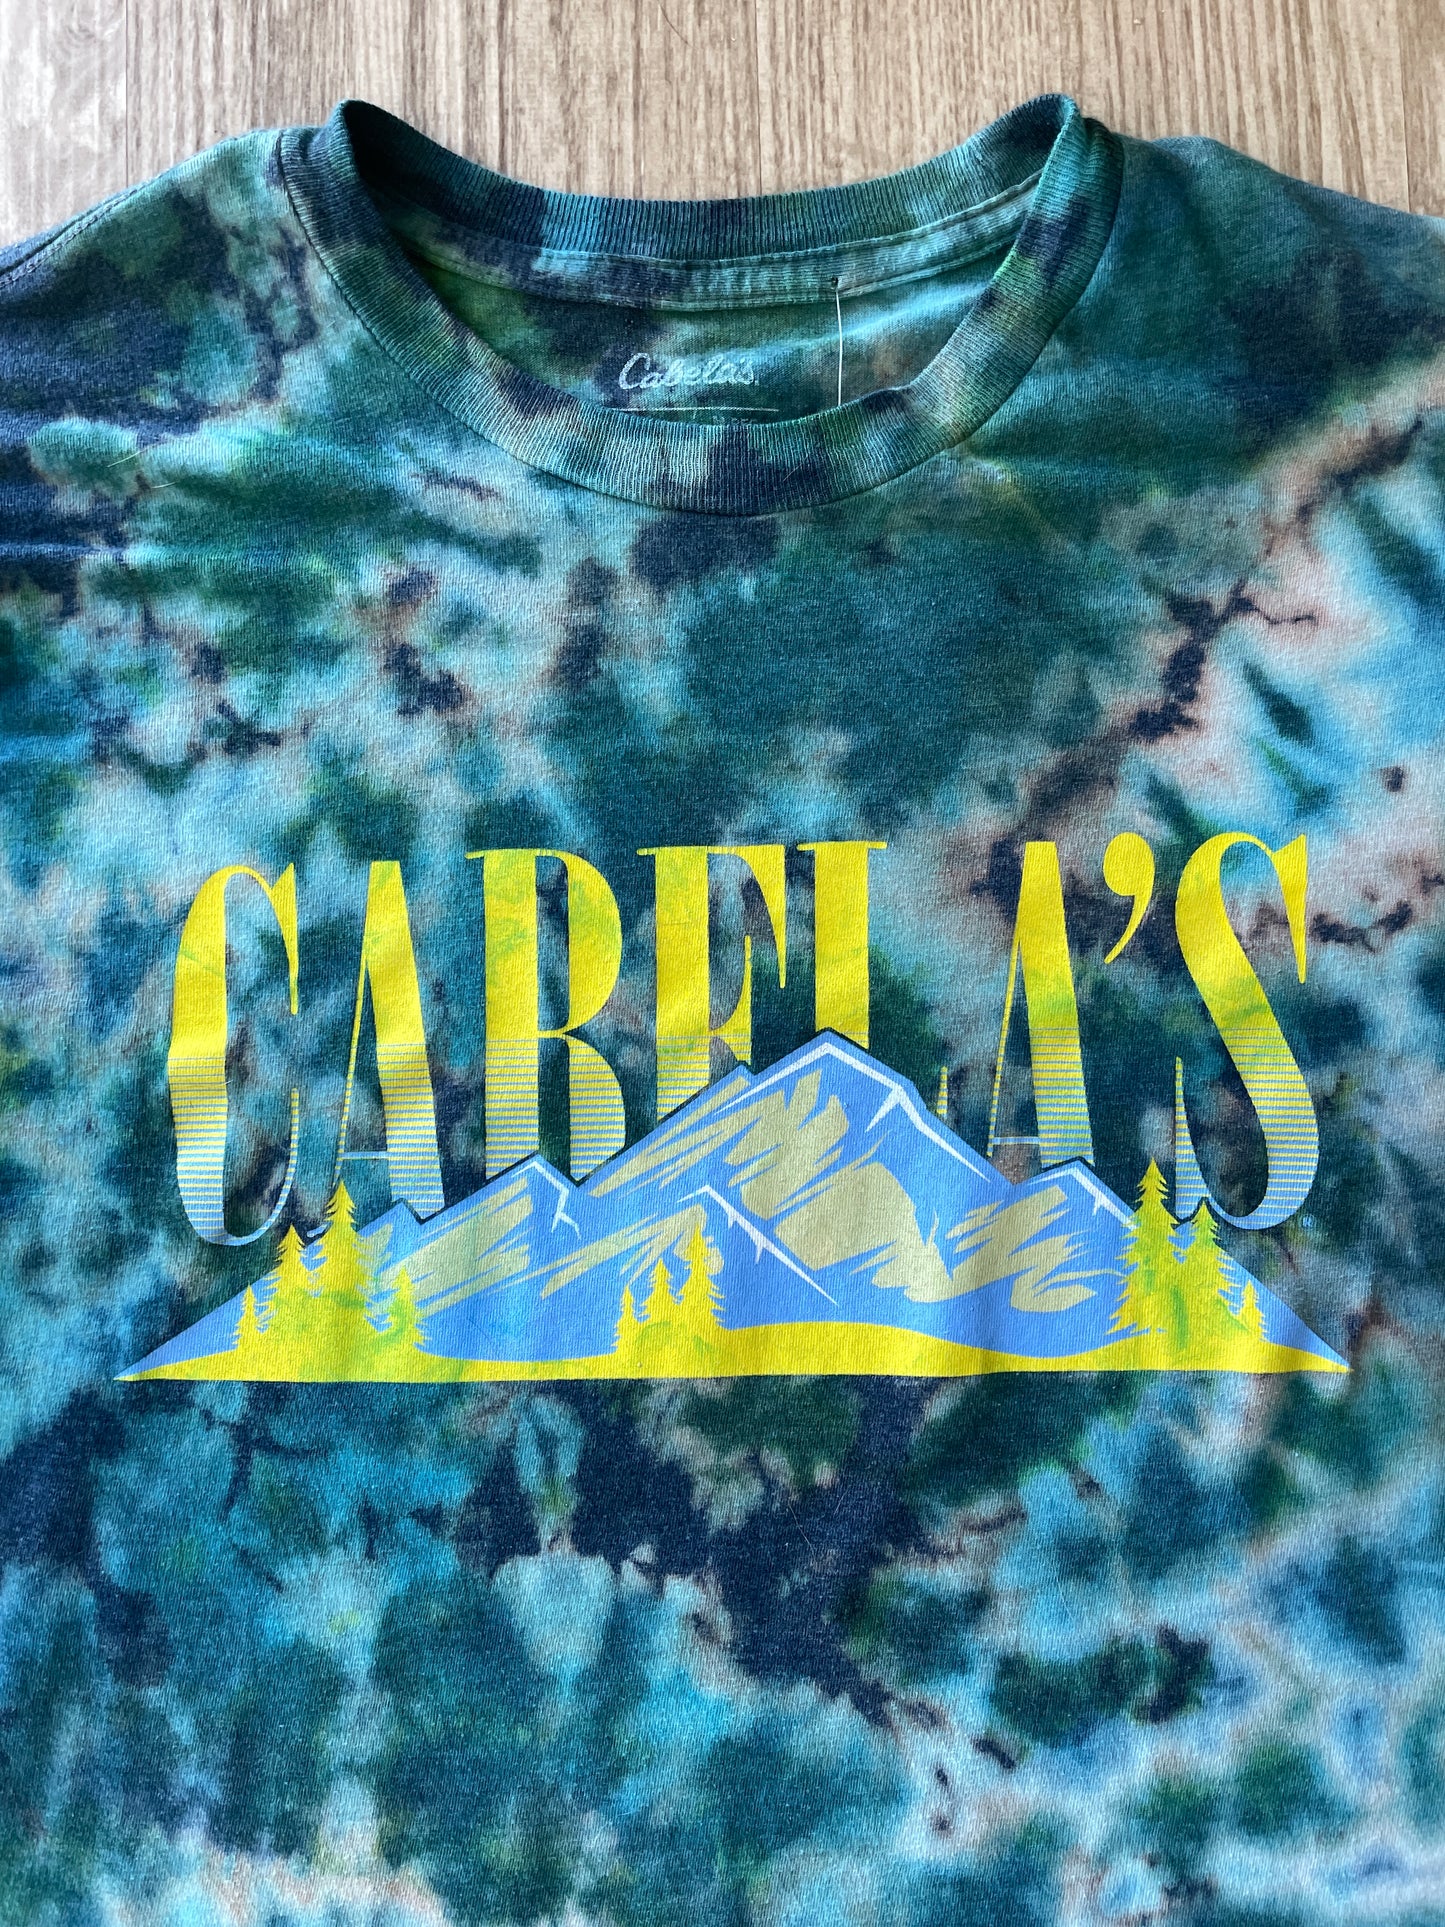 MEDIUM Men’s Cabela's Reverse Tie Dye Short Sleeve T-Shirt | One-Of-a-Kind Upcycled Blue and Green Crumpled Top